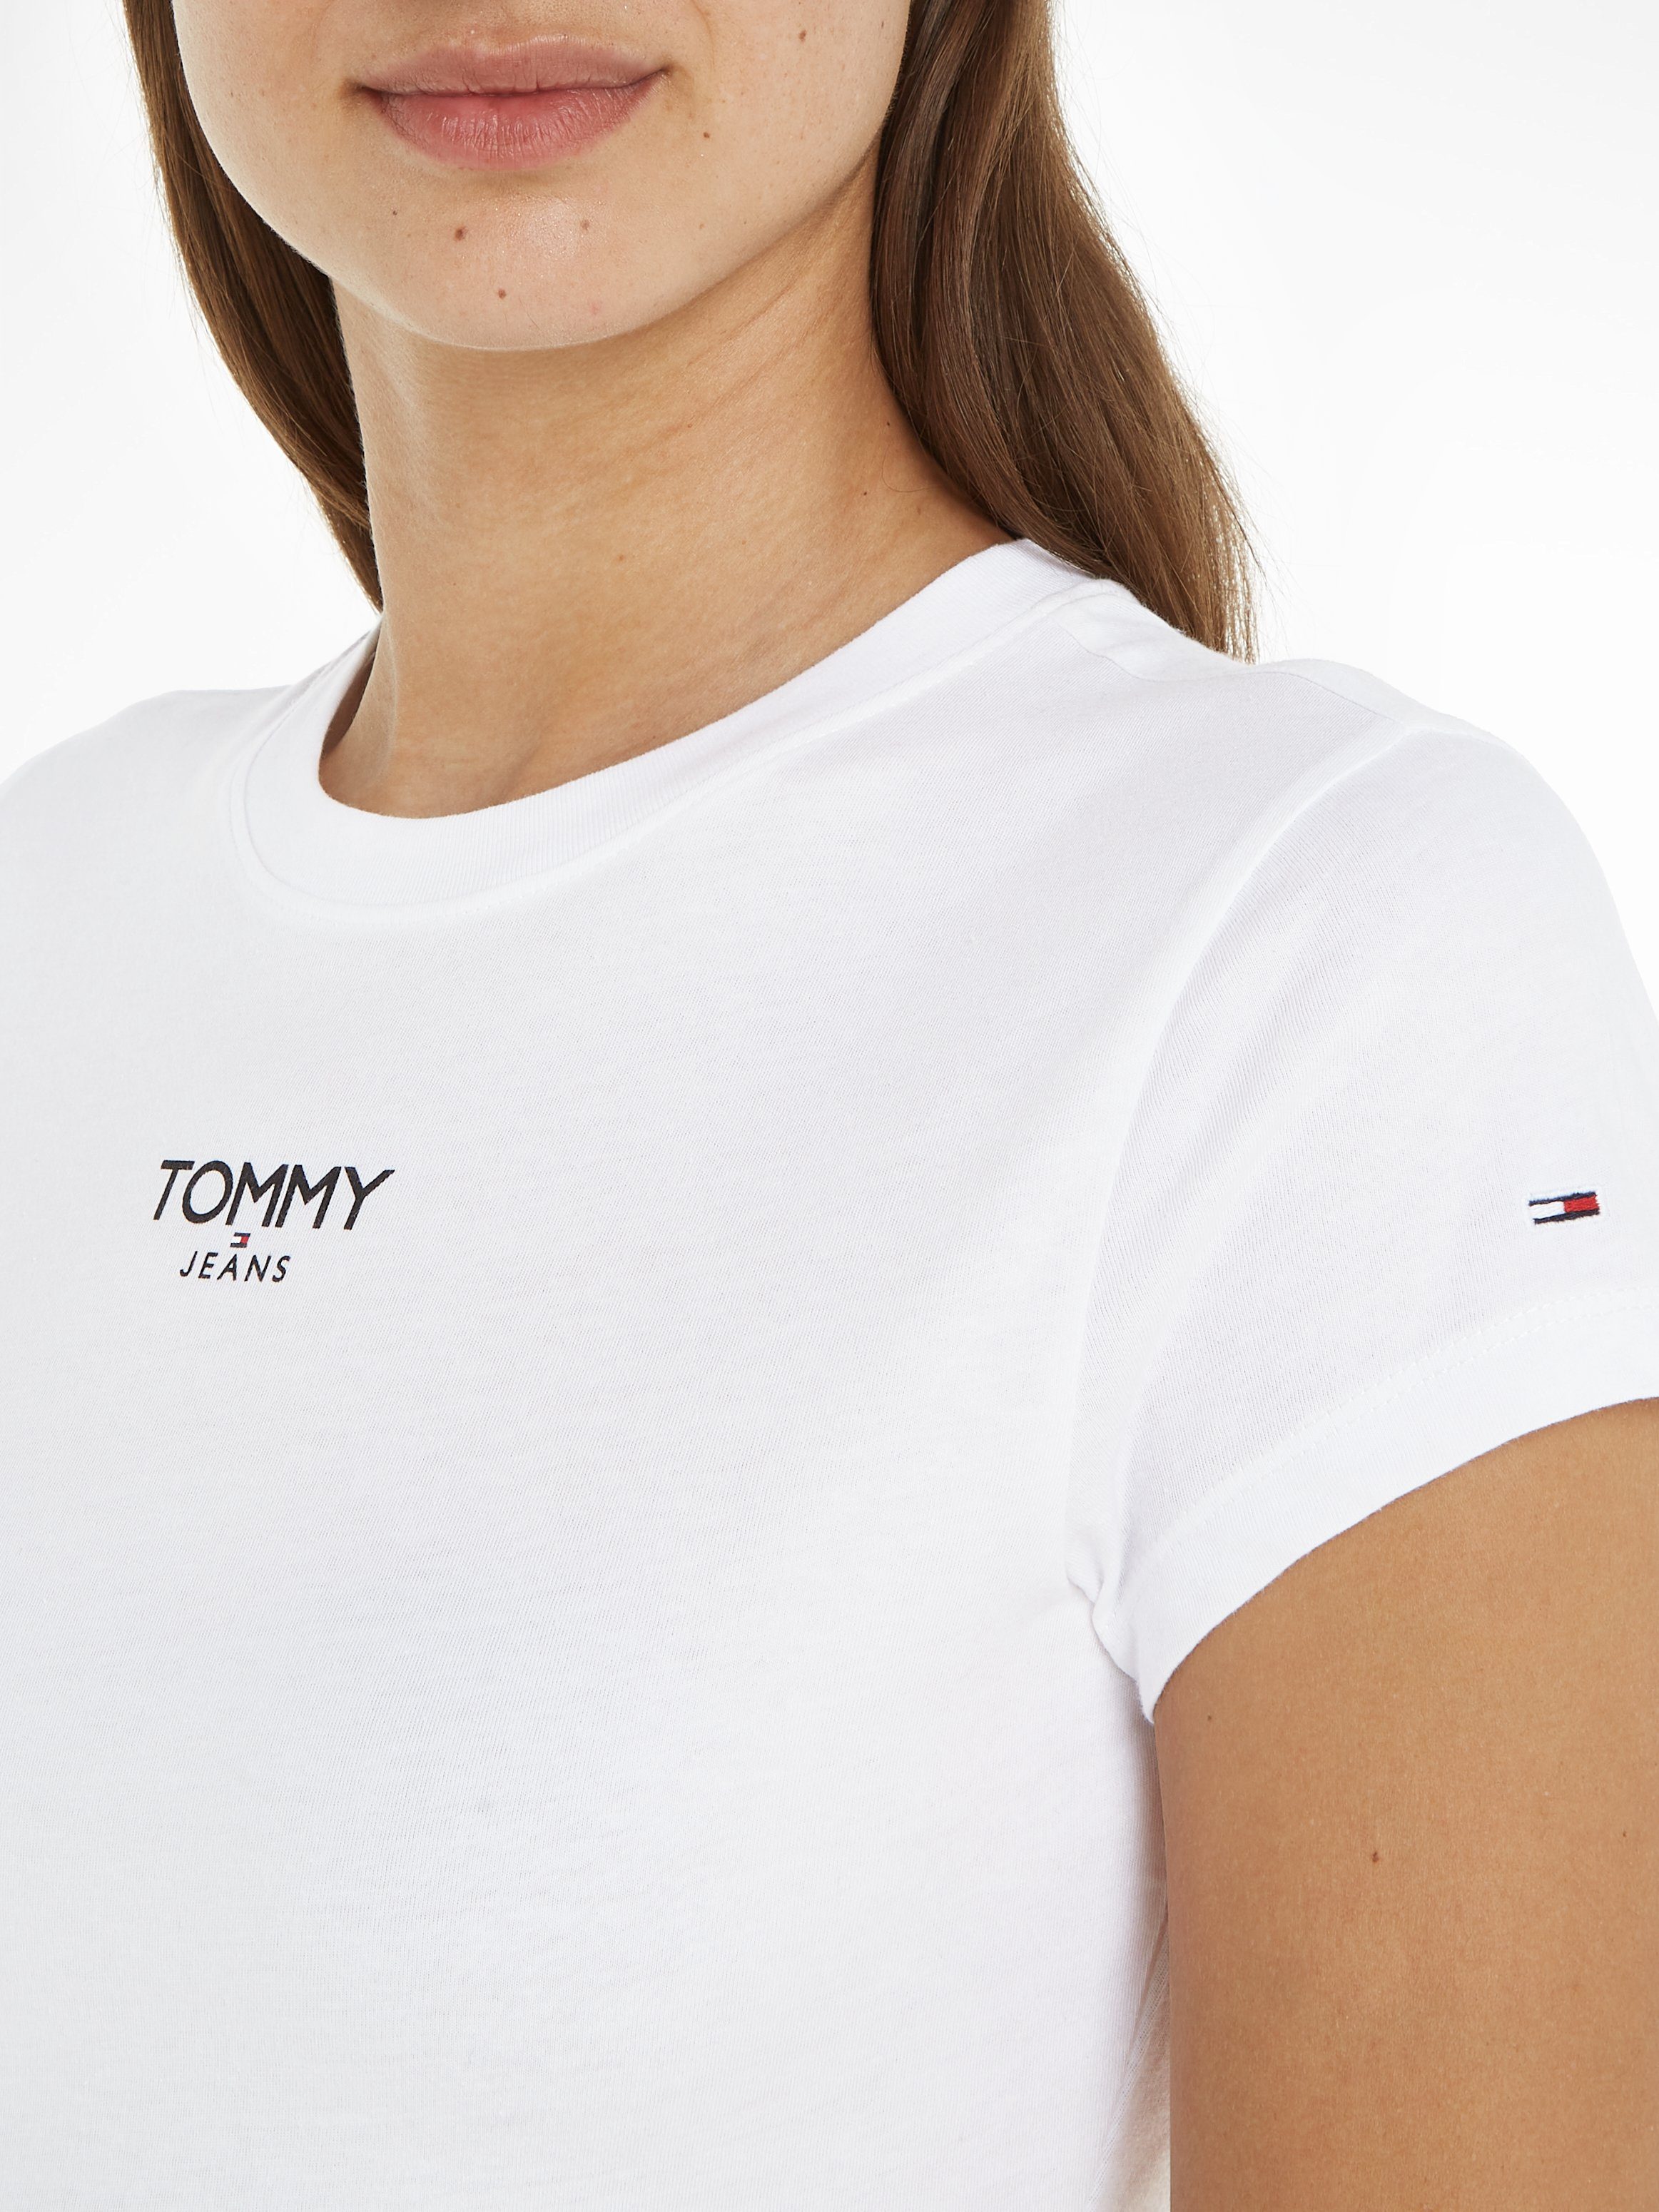 Tommy Tommy BBY Jeans T-Shirt ESSENTIAL White 1 TJW mit SS Jeans Logo LOGO